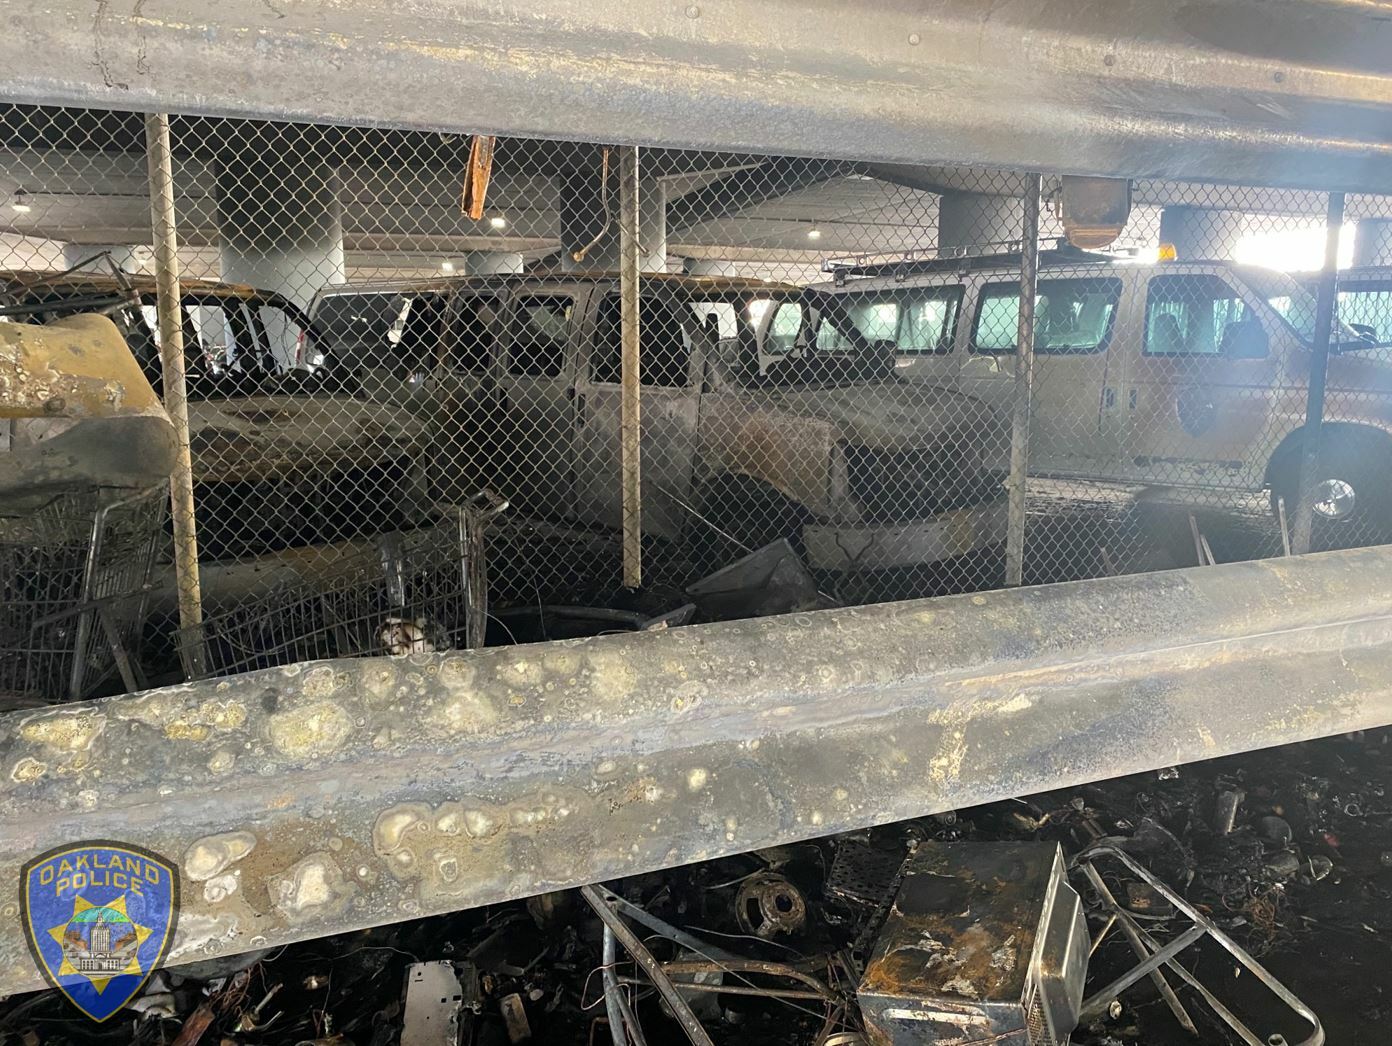 Charred OPD vehicles destroyed in a fire